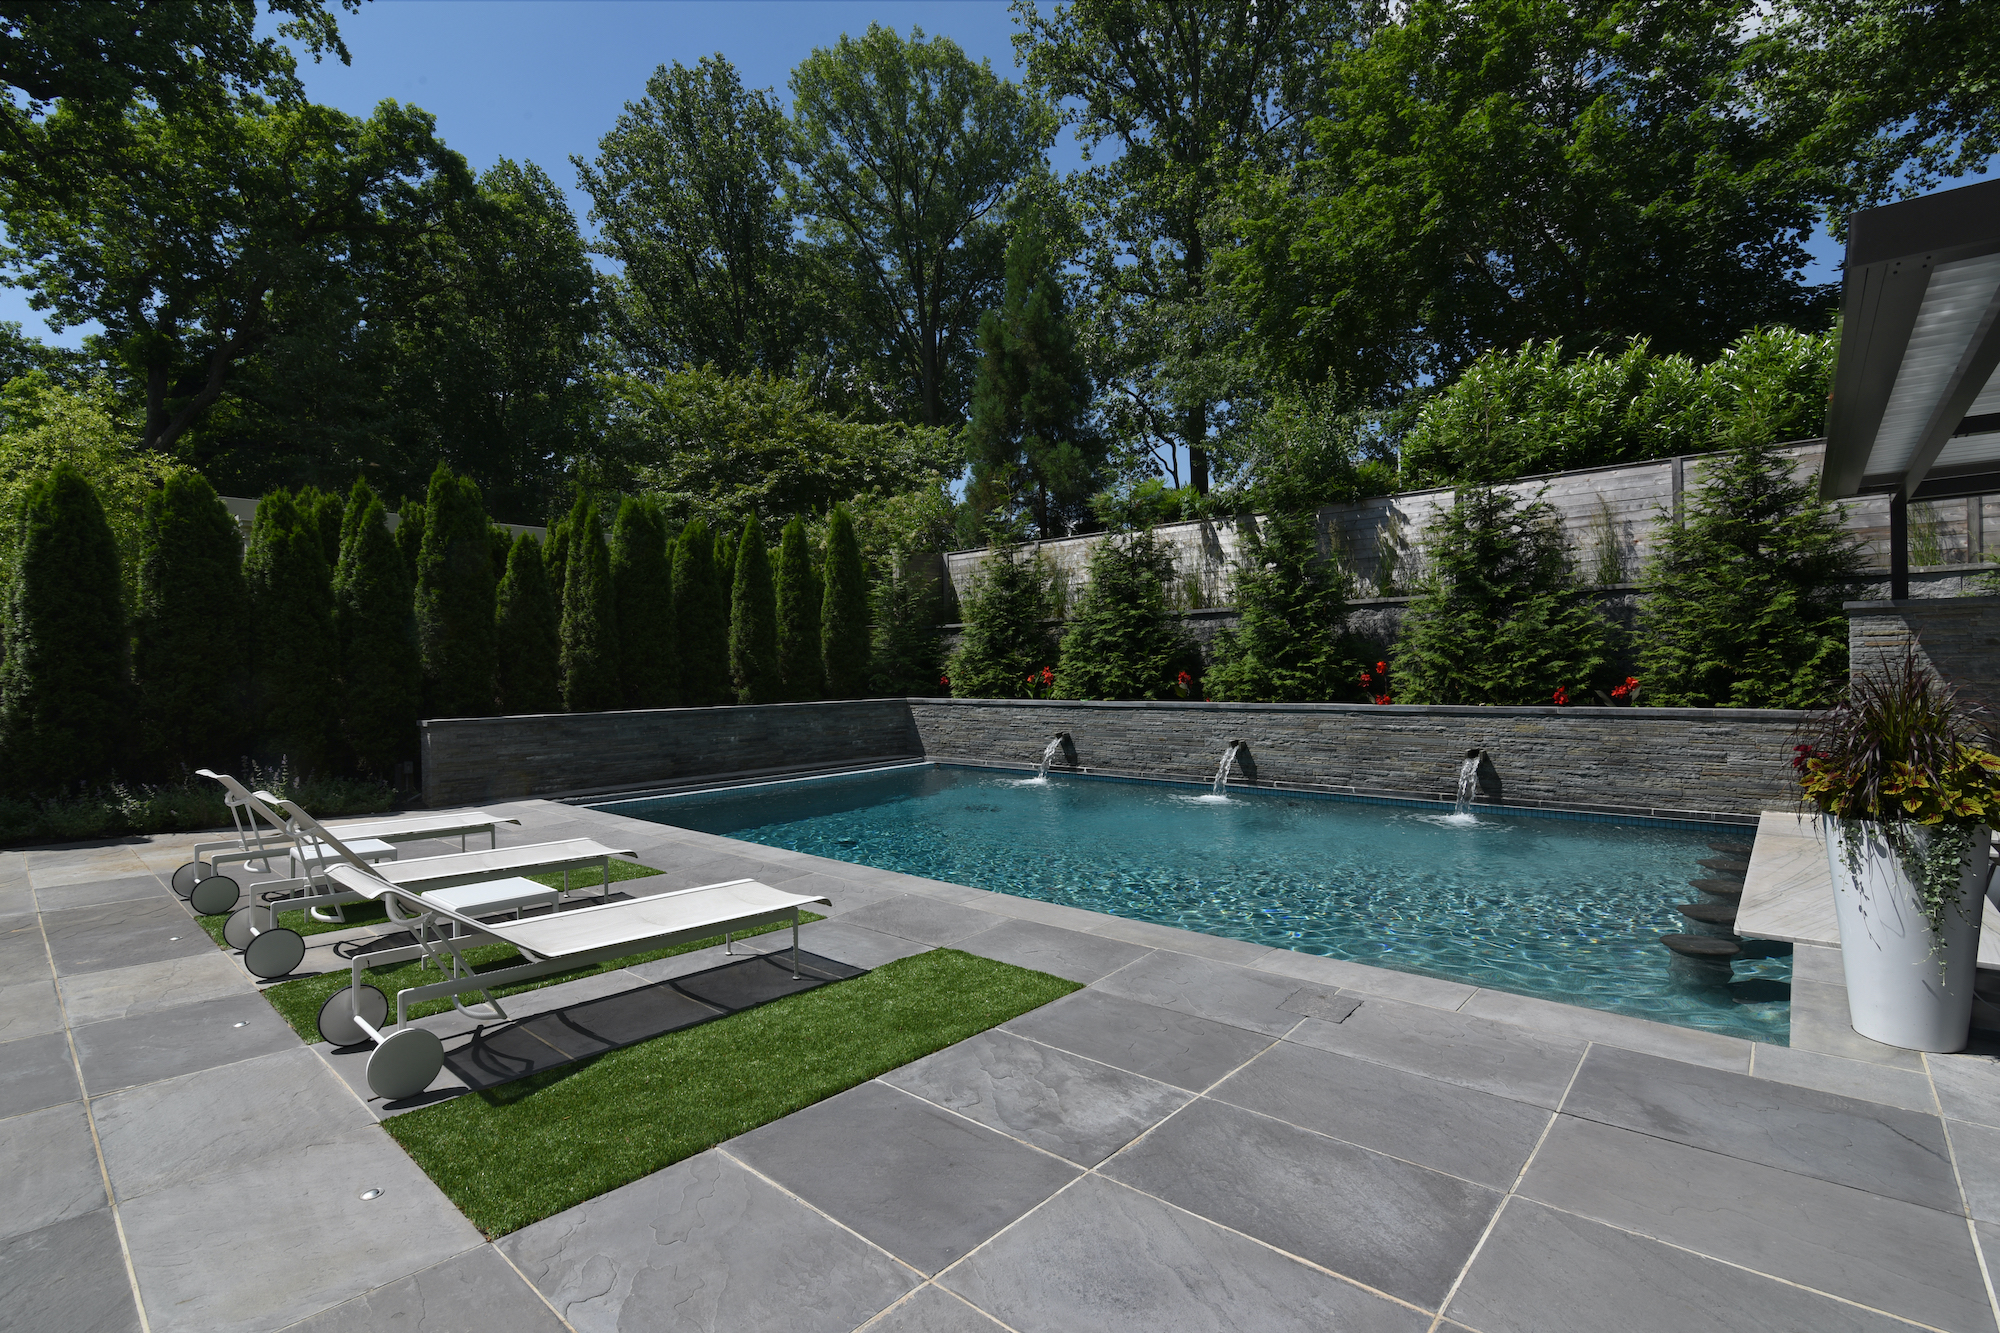 Wet-cast stone pool deck. Astro-turf, pool with water features. Bond beam wall and screening trees.